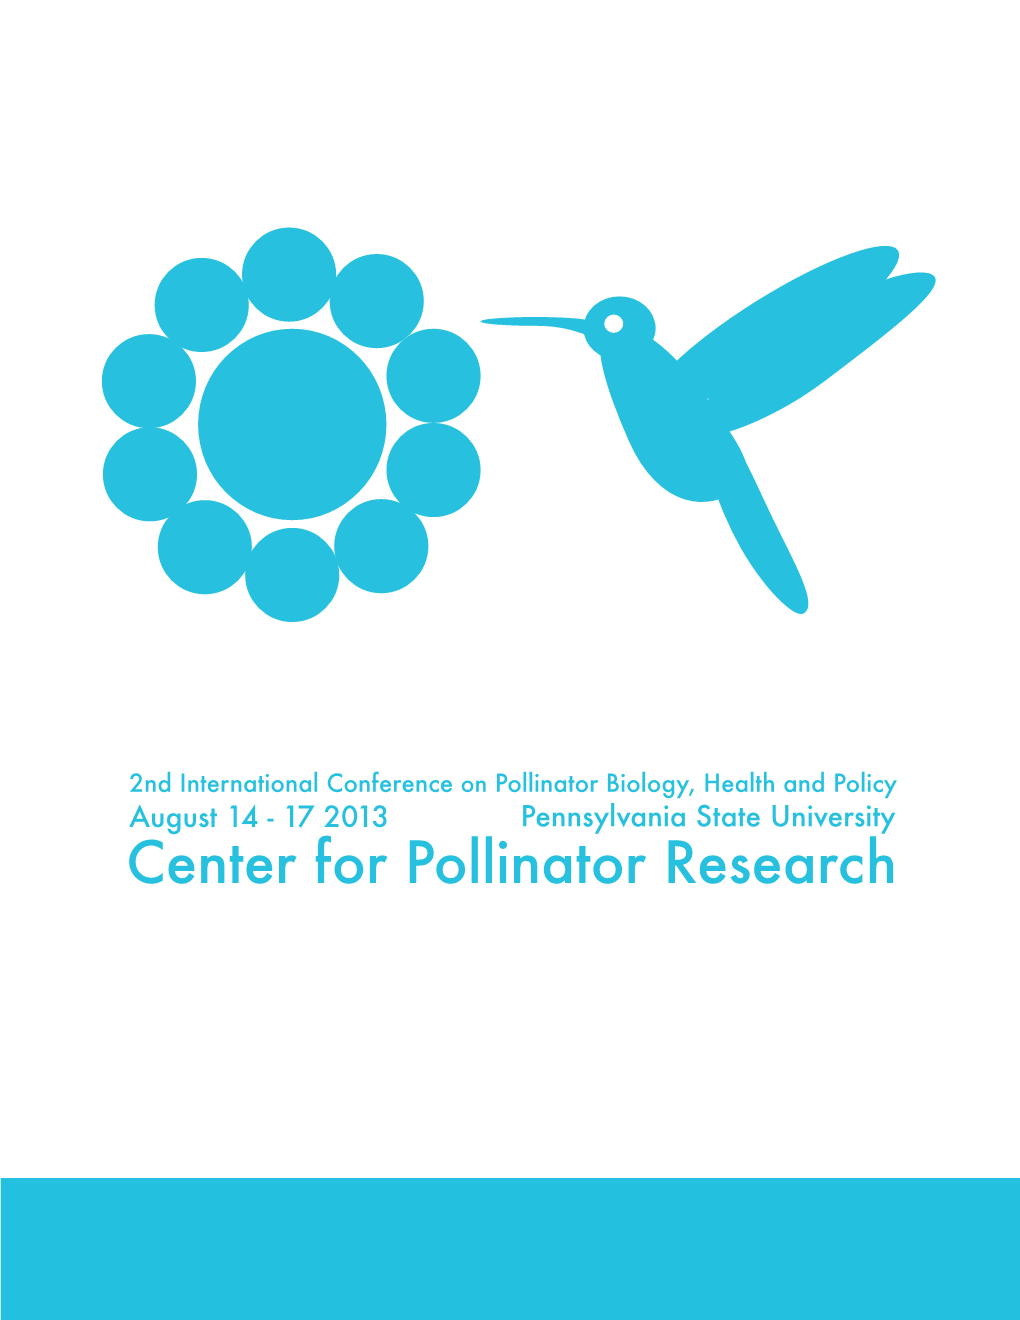 Center for Pollinator Research